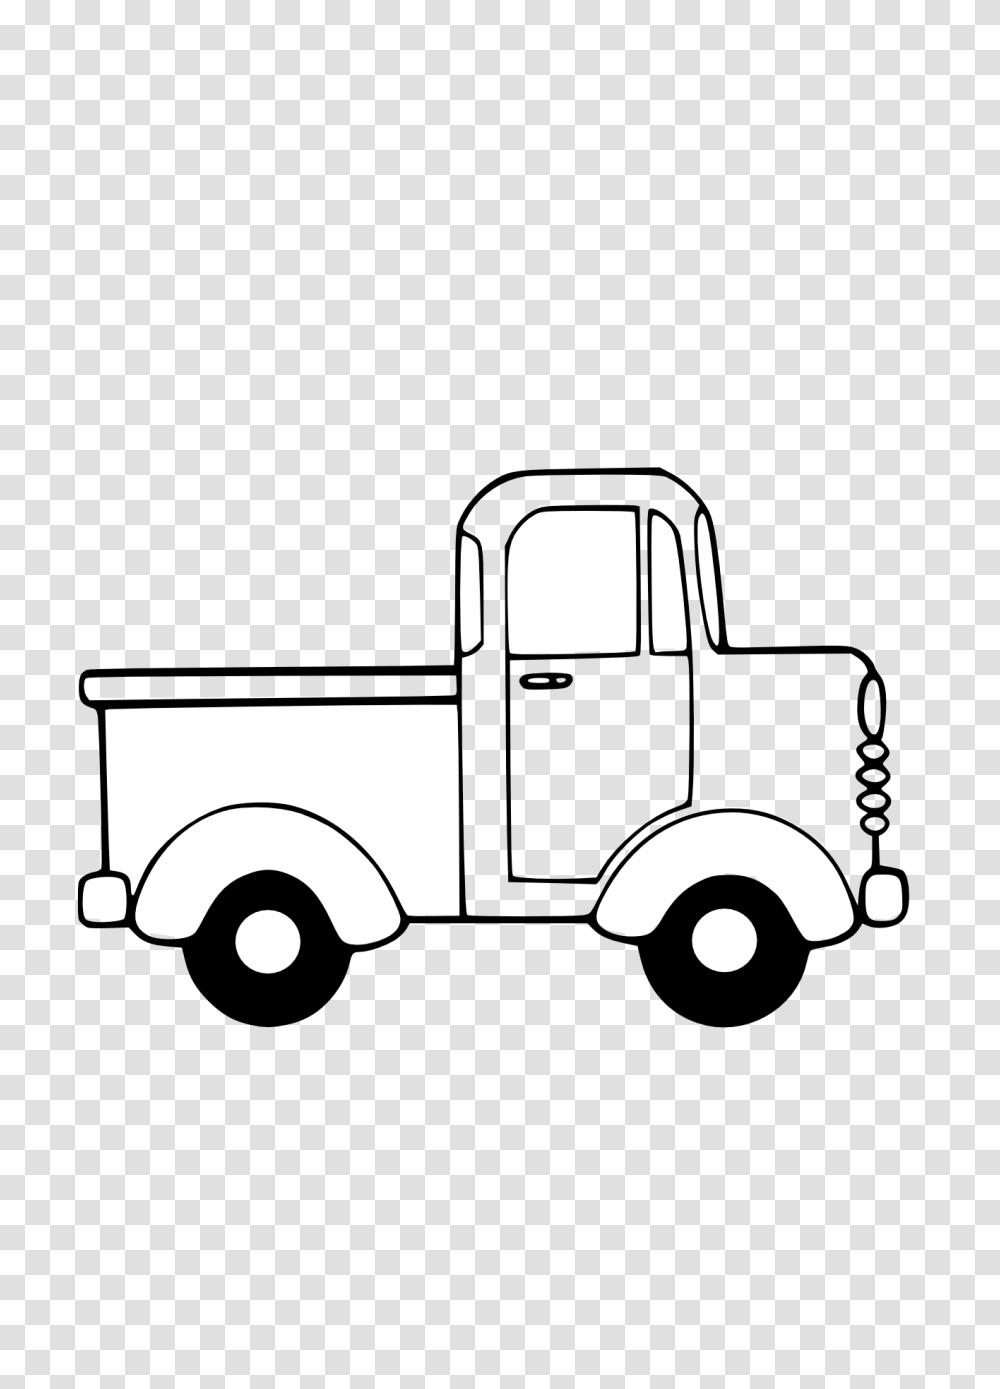 Truck Black White Line Art Christmas Xmas Toy Scalable Vector, Vehicle, Transportation, Pickup Truck, Fire Truck Transparent Png